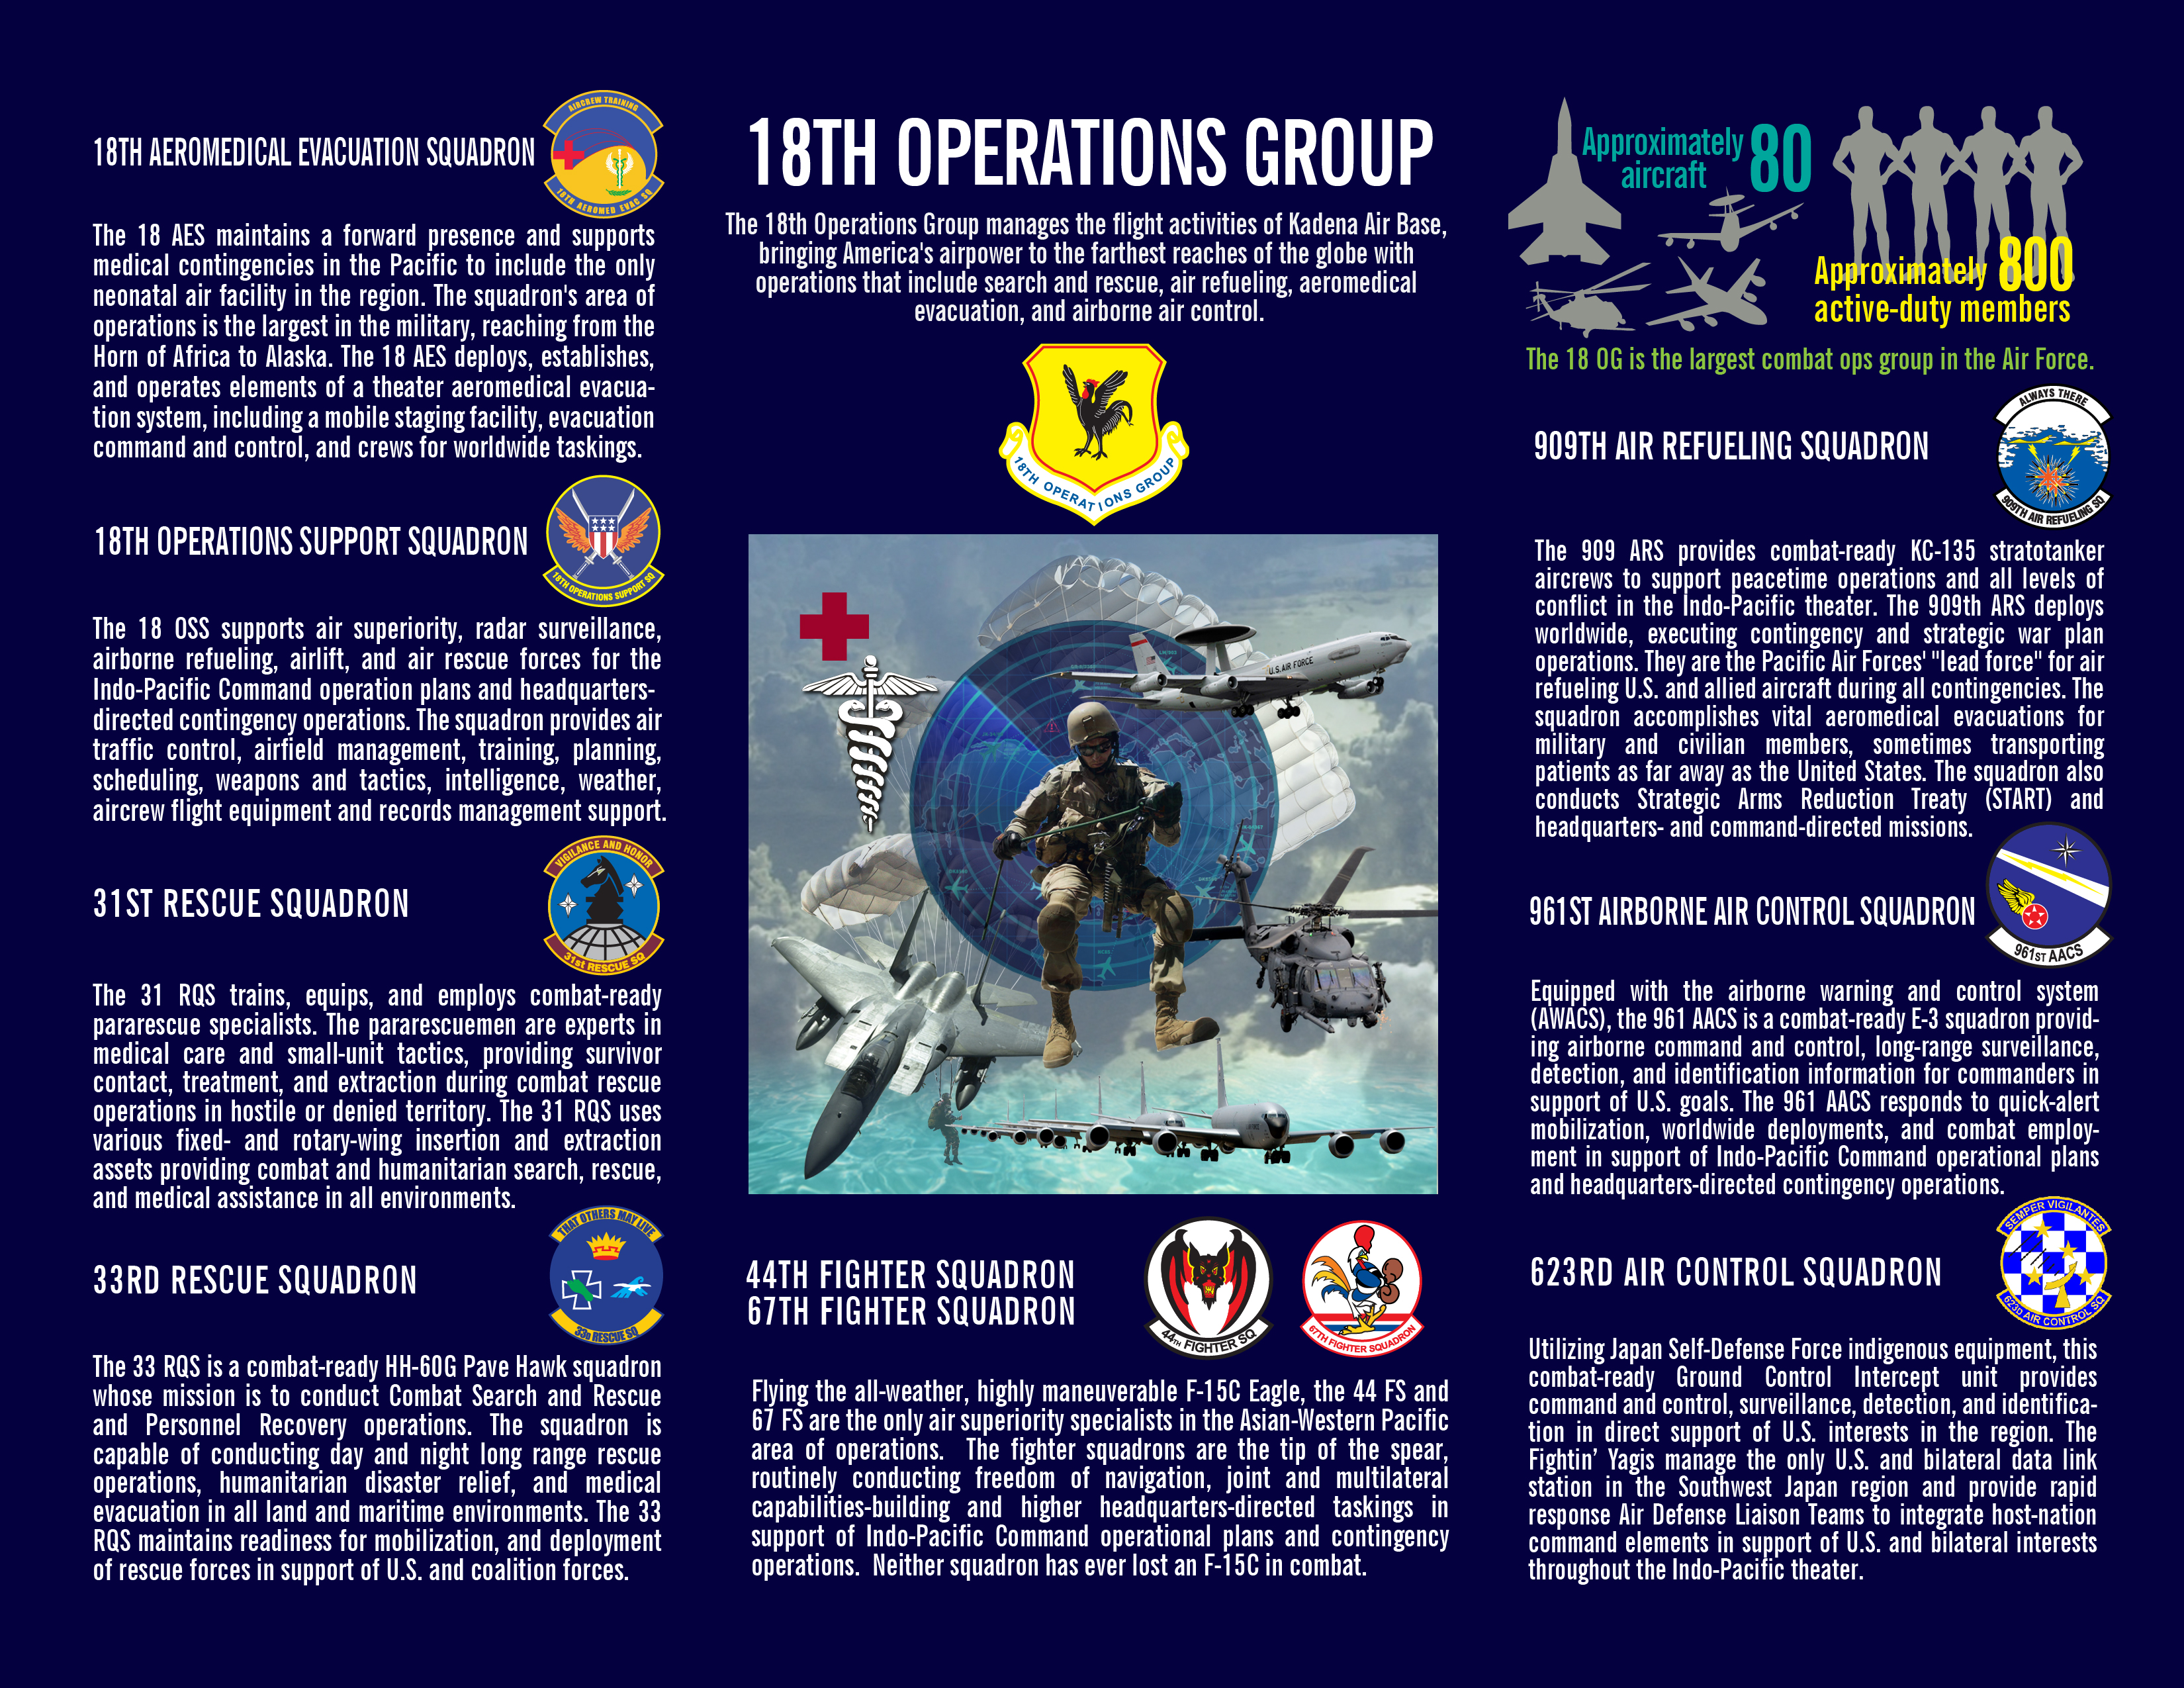 18th Operations Group graphic describing subordinate units and their mission